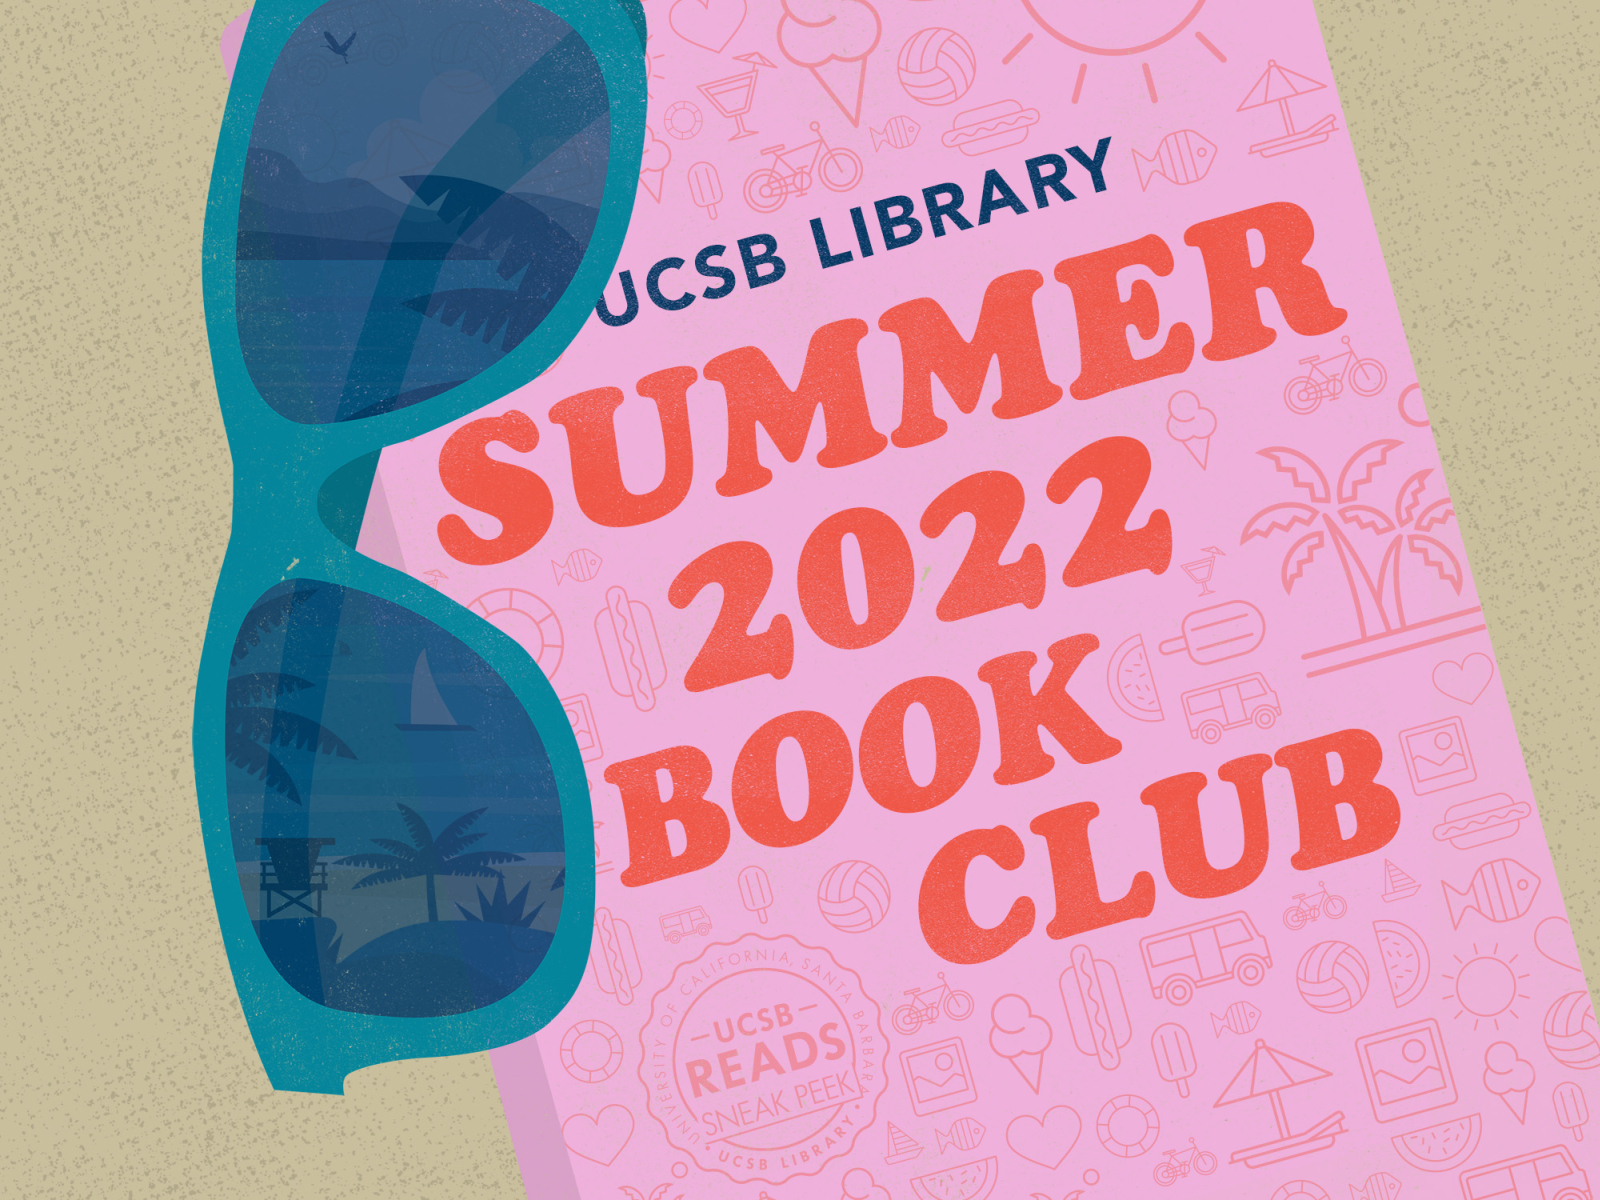 Participate in a StudentLed Summer Book Club by Jonathan Rissmeyer on